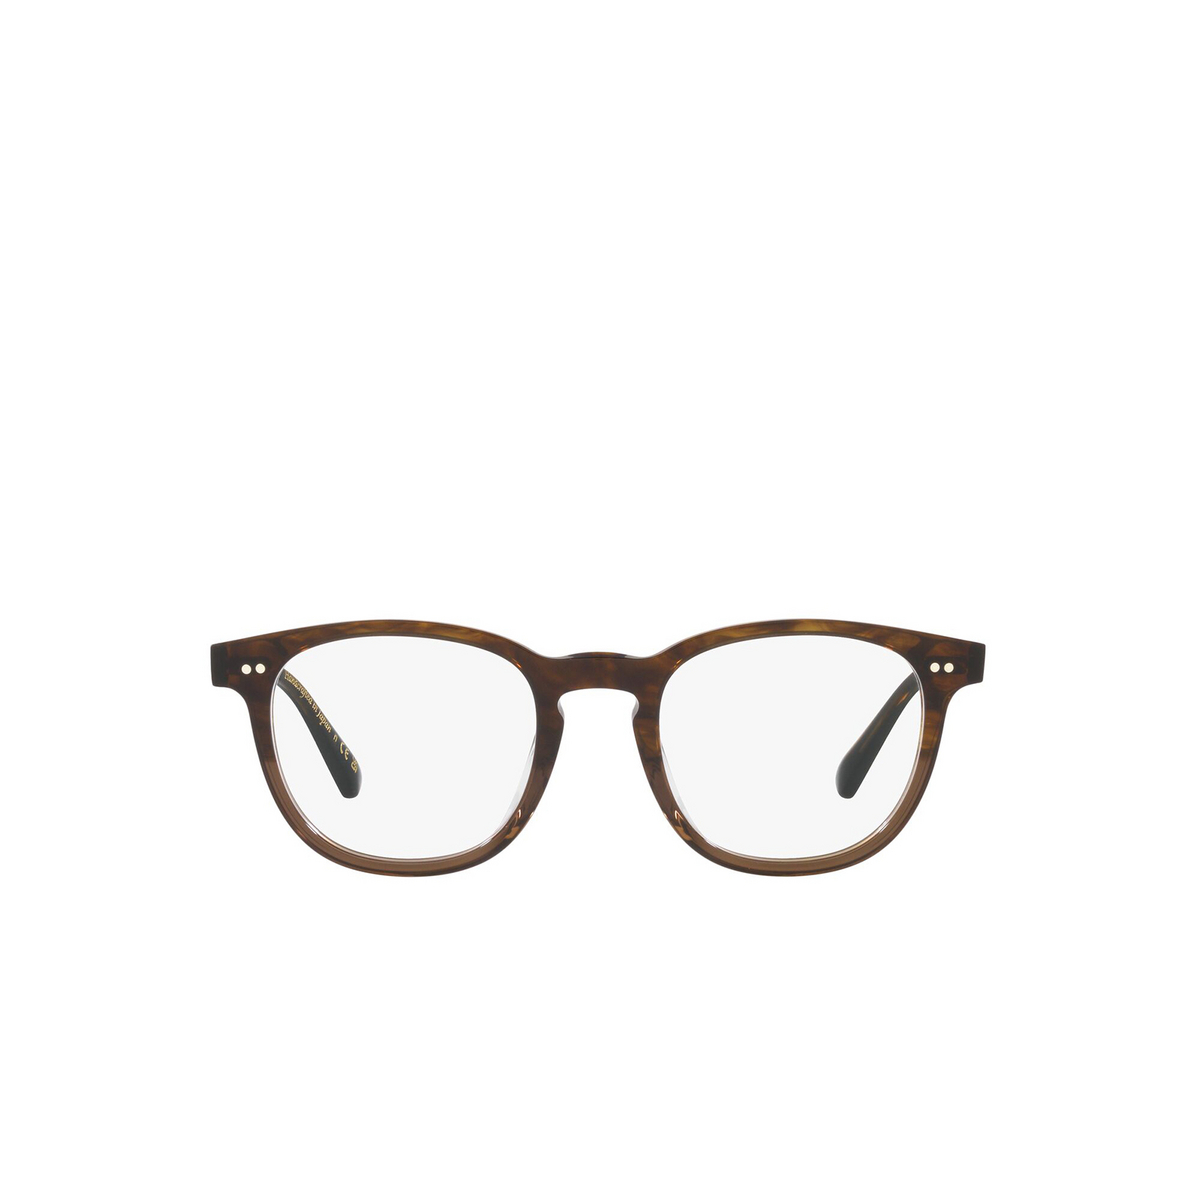 Oliver Peoples KISHO Eyeglasses 1732 Sedona red/taupe gradient - front view